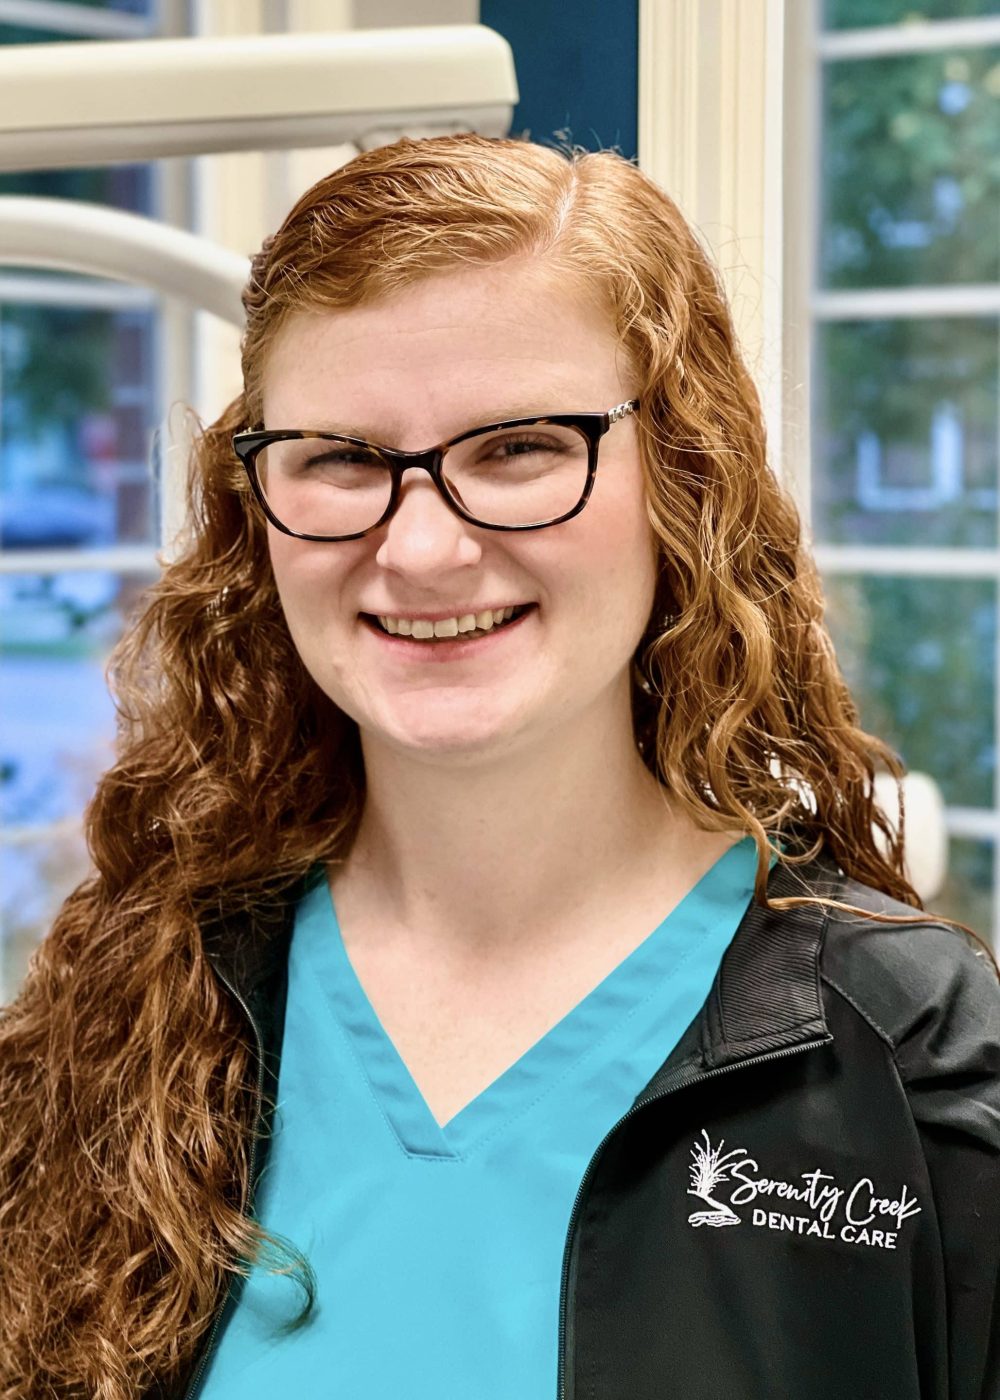 Dental Assistant Hayley at Serenity Creek Dental Care in Noblesville, IN